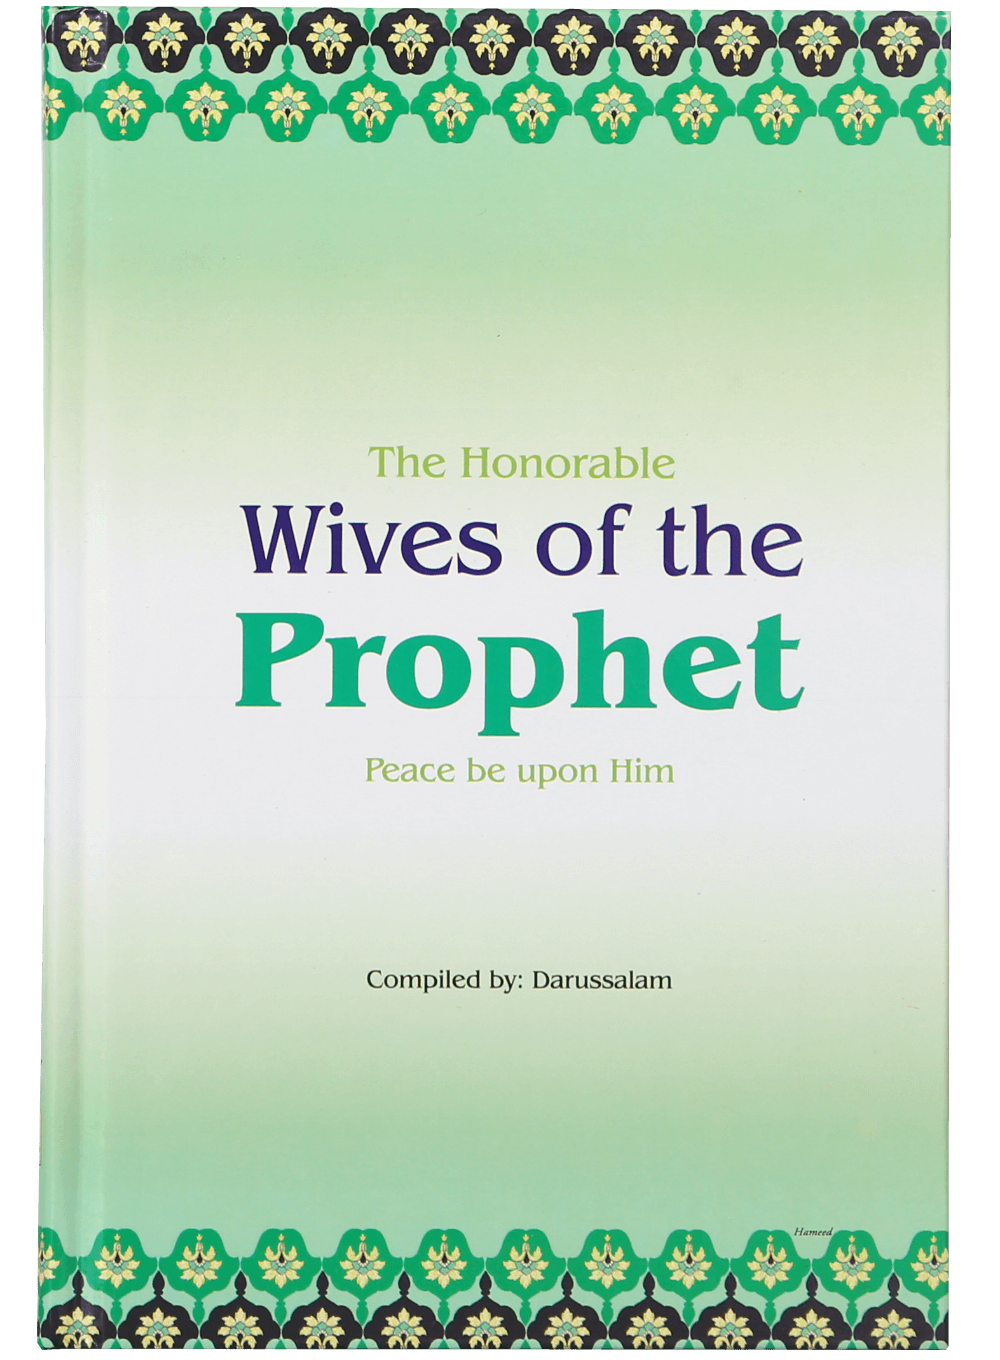 darussalam-2017-10-04-10-21-15the-honorable-wives-of-the-prophet-(1)